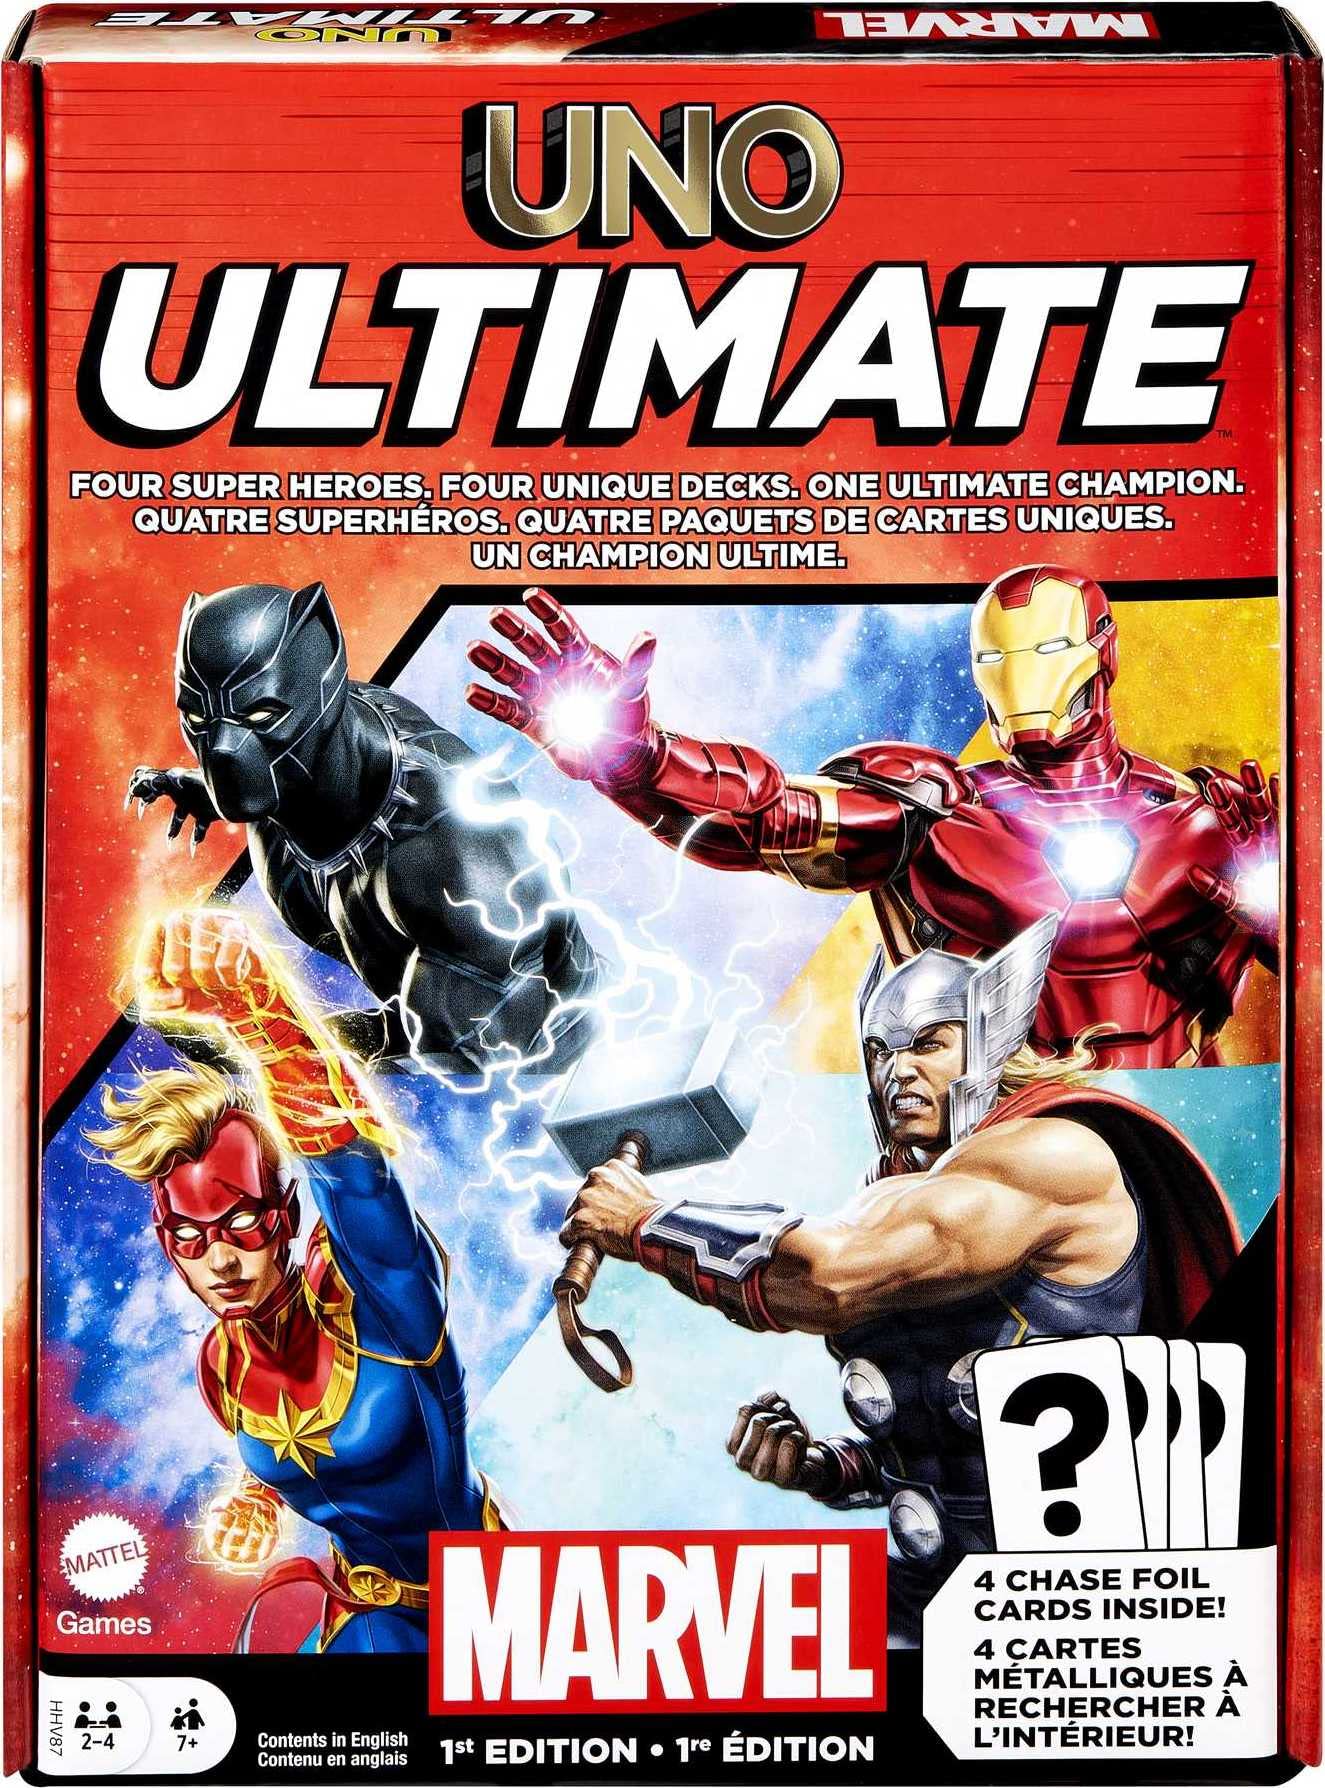 Mattel Games UNO Ultimate Marvel Card Game with 4 Character Decks - $6.49 - Amazon